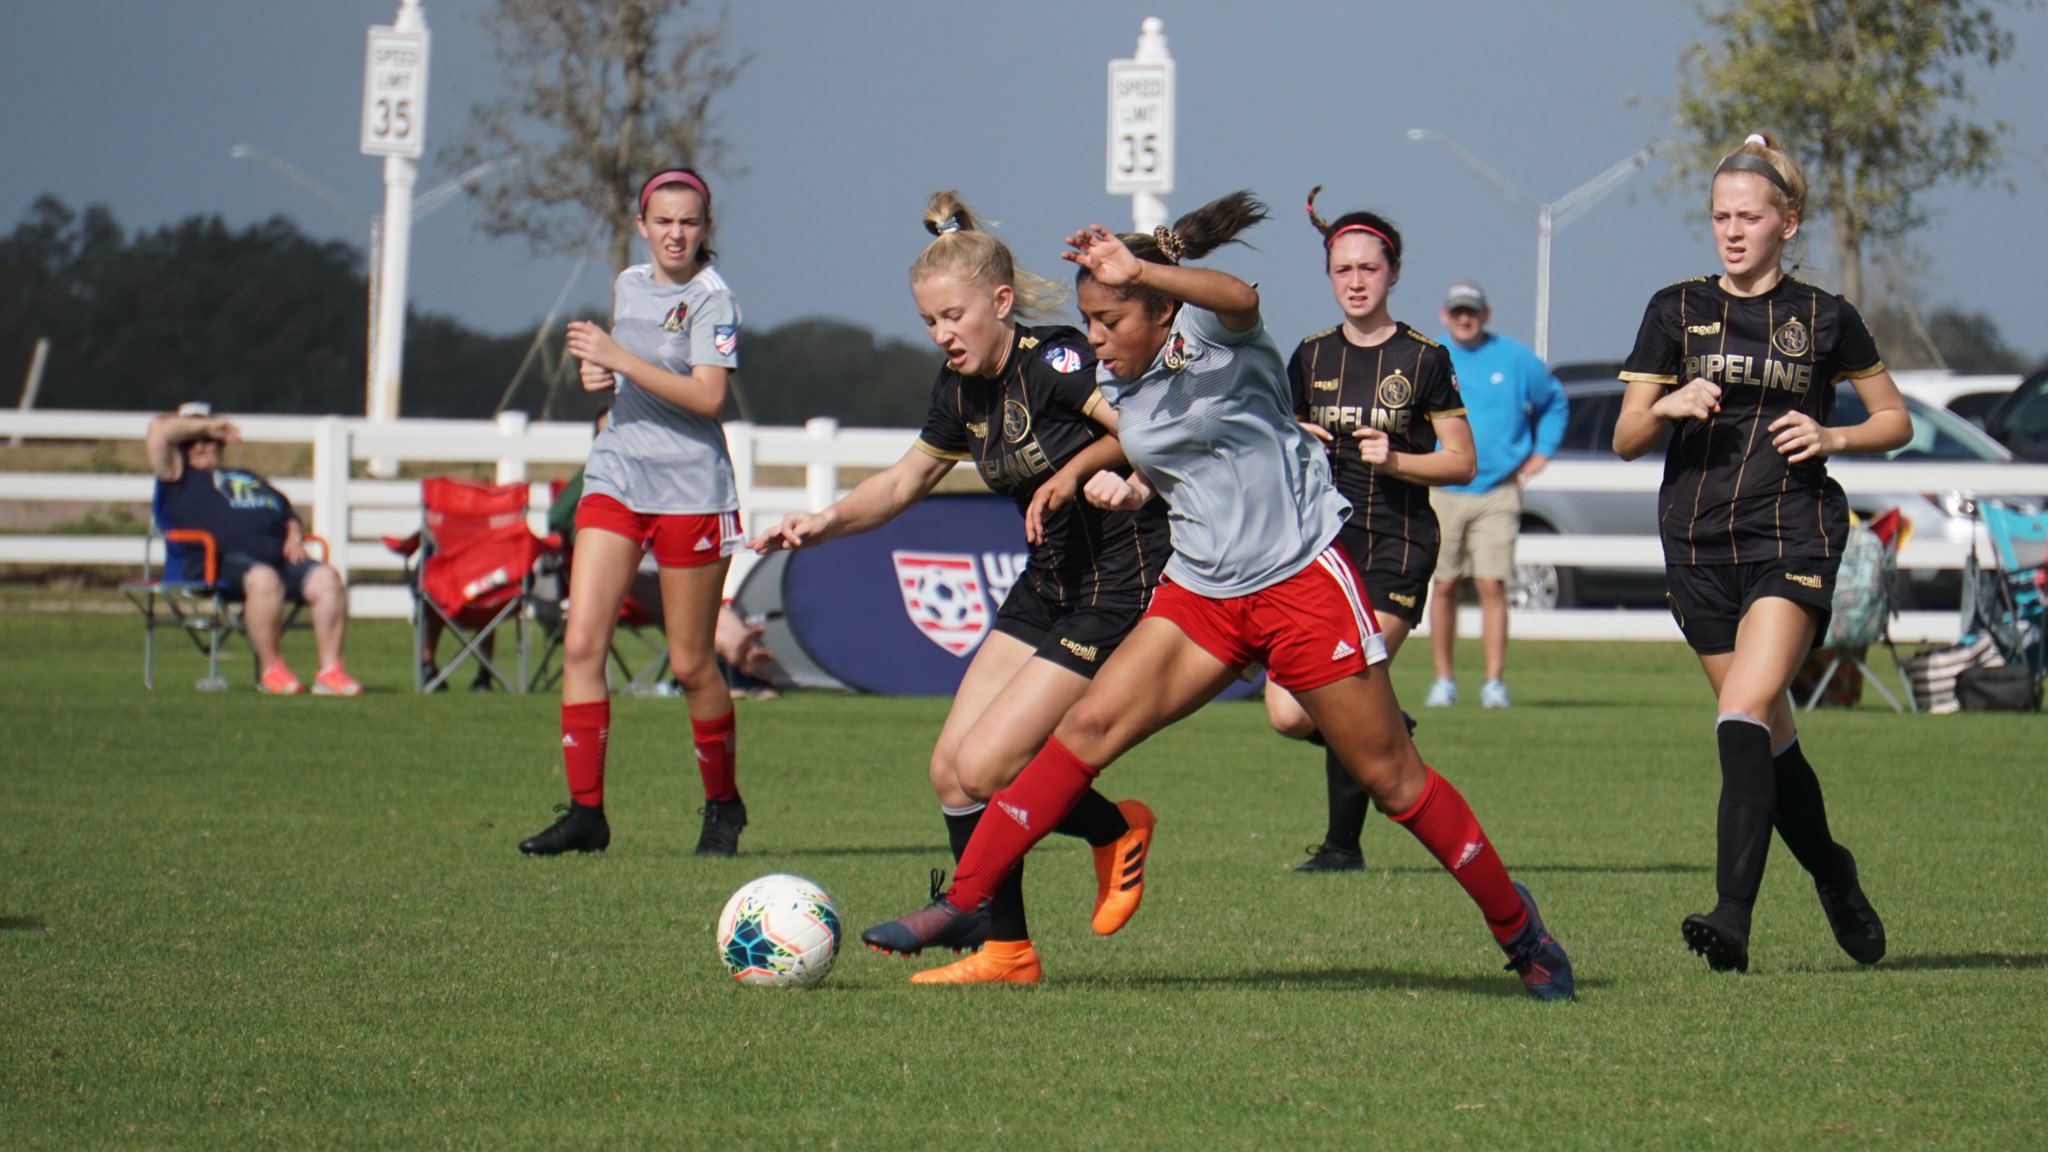 Girls National League continues in Florida